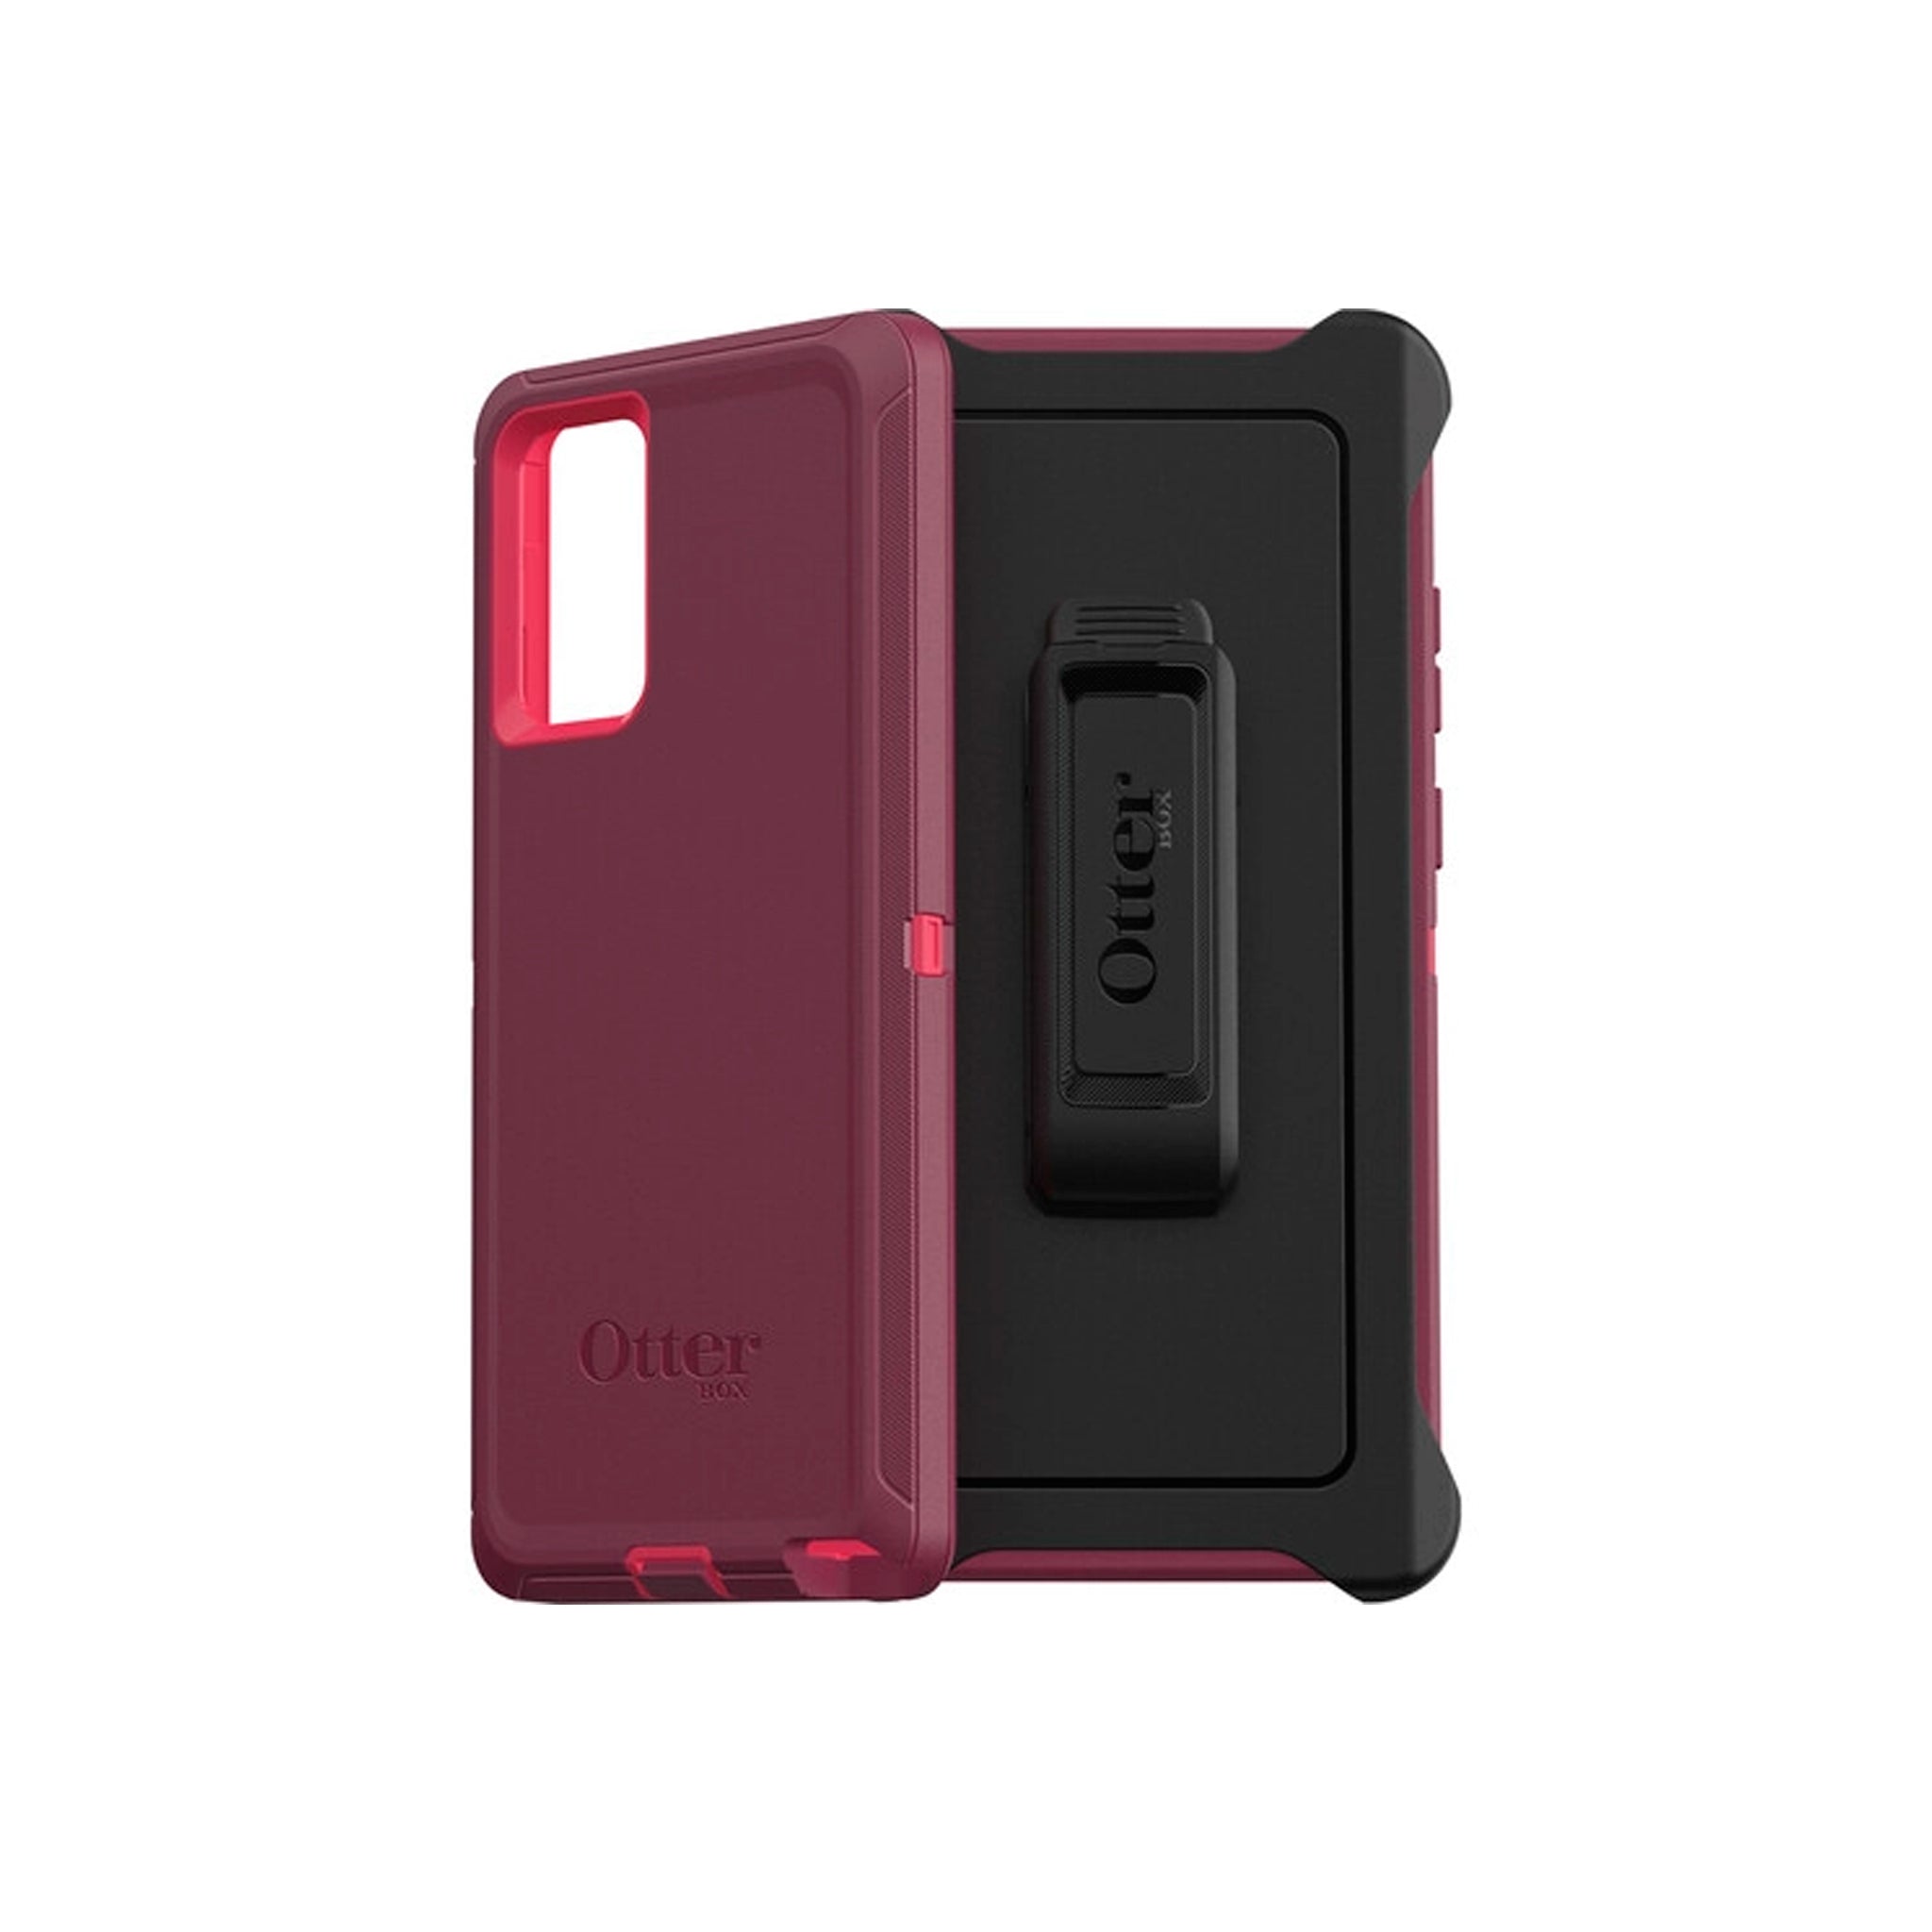 OtterBox - Galaxy Note20 5G Defender Series Case - Berry Potion Pink